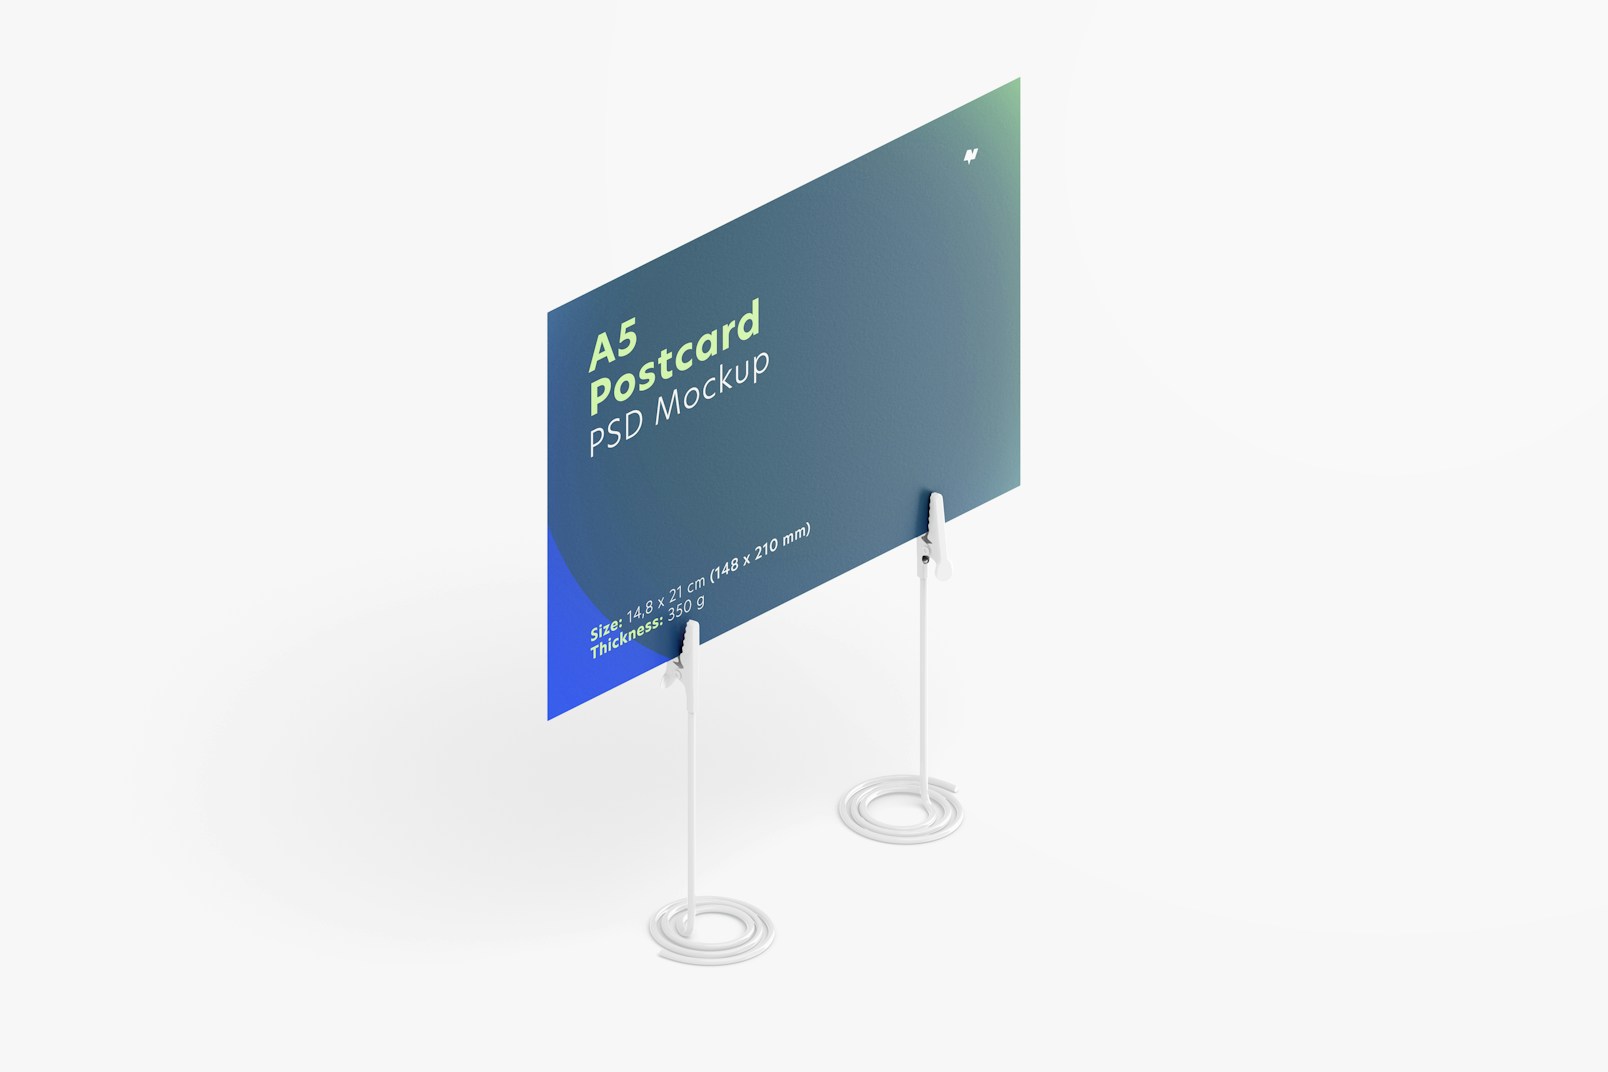 A5 Postcard with Card Holder Mockup, Isometric View